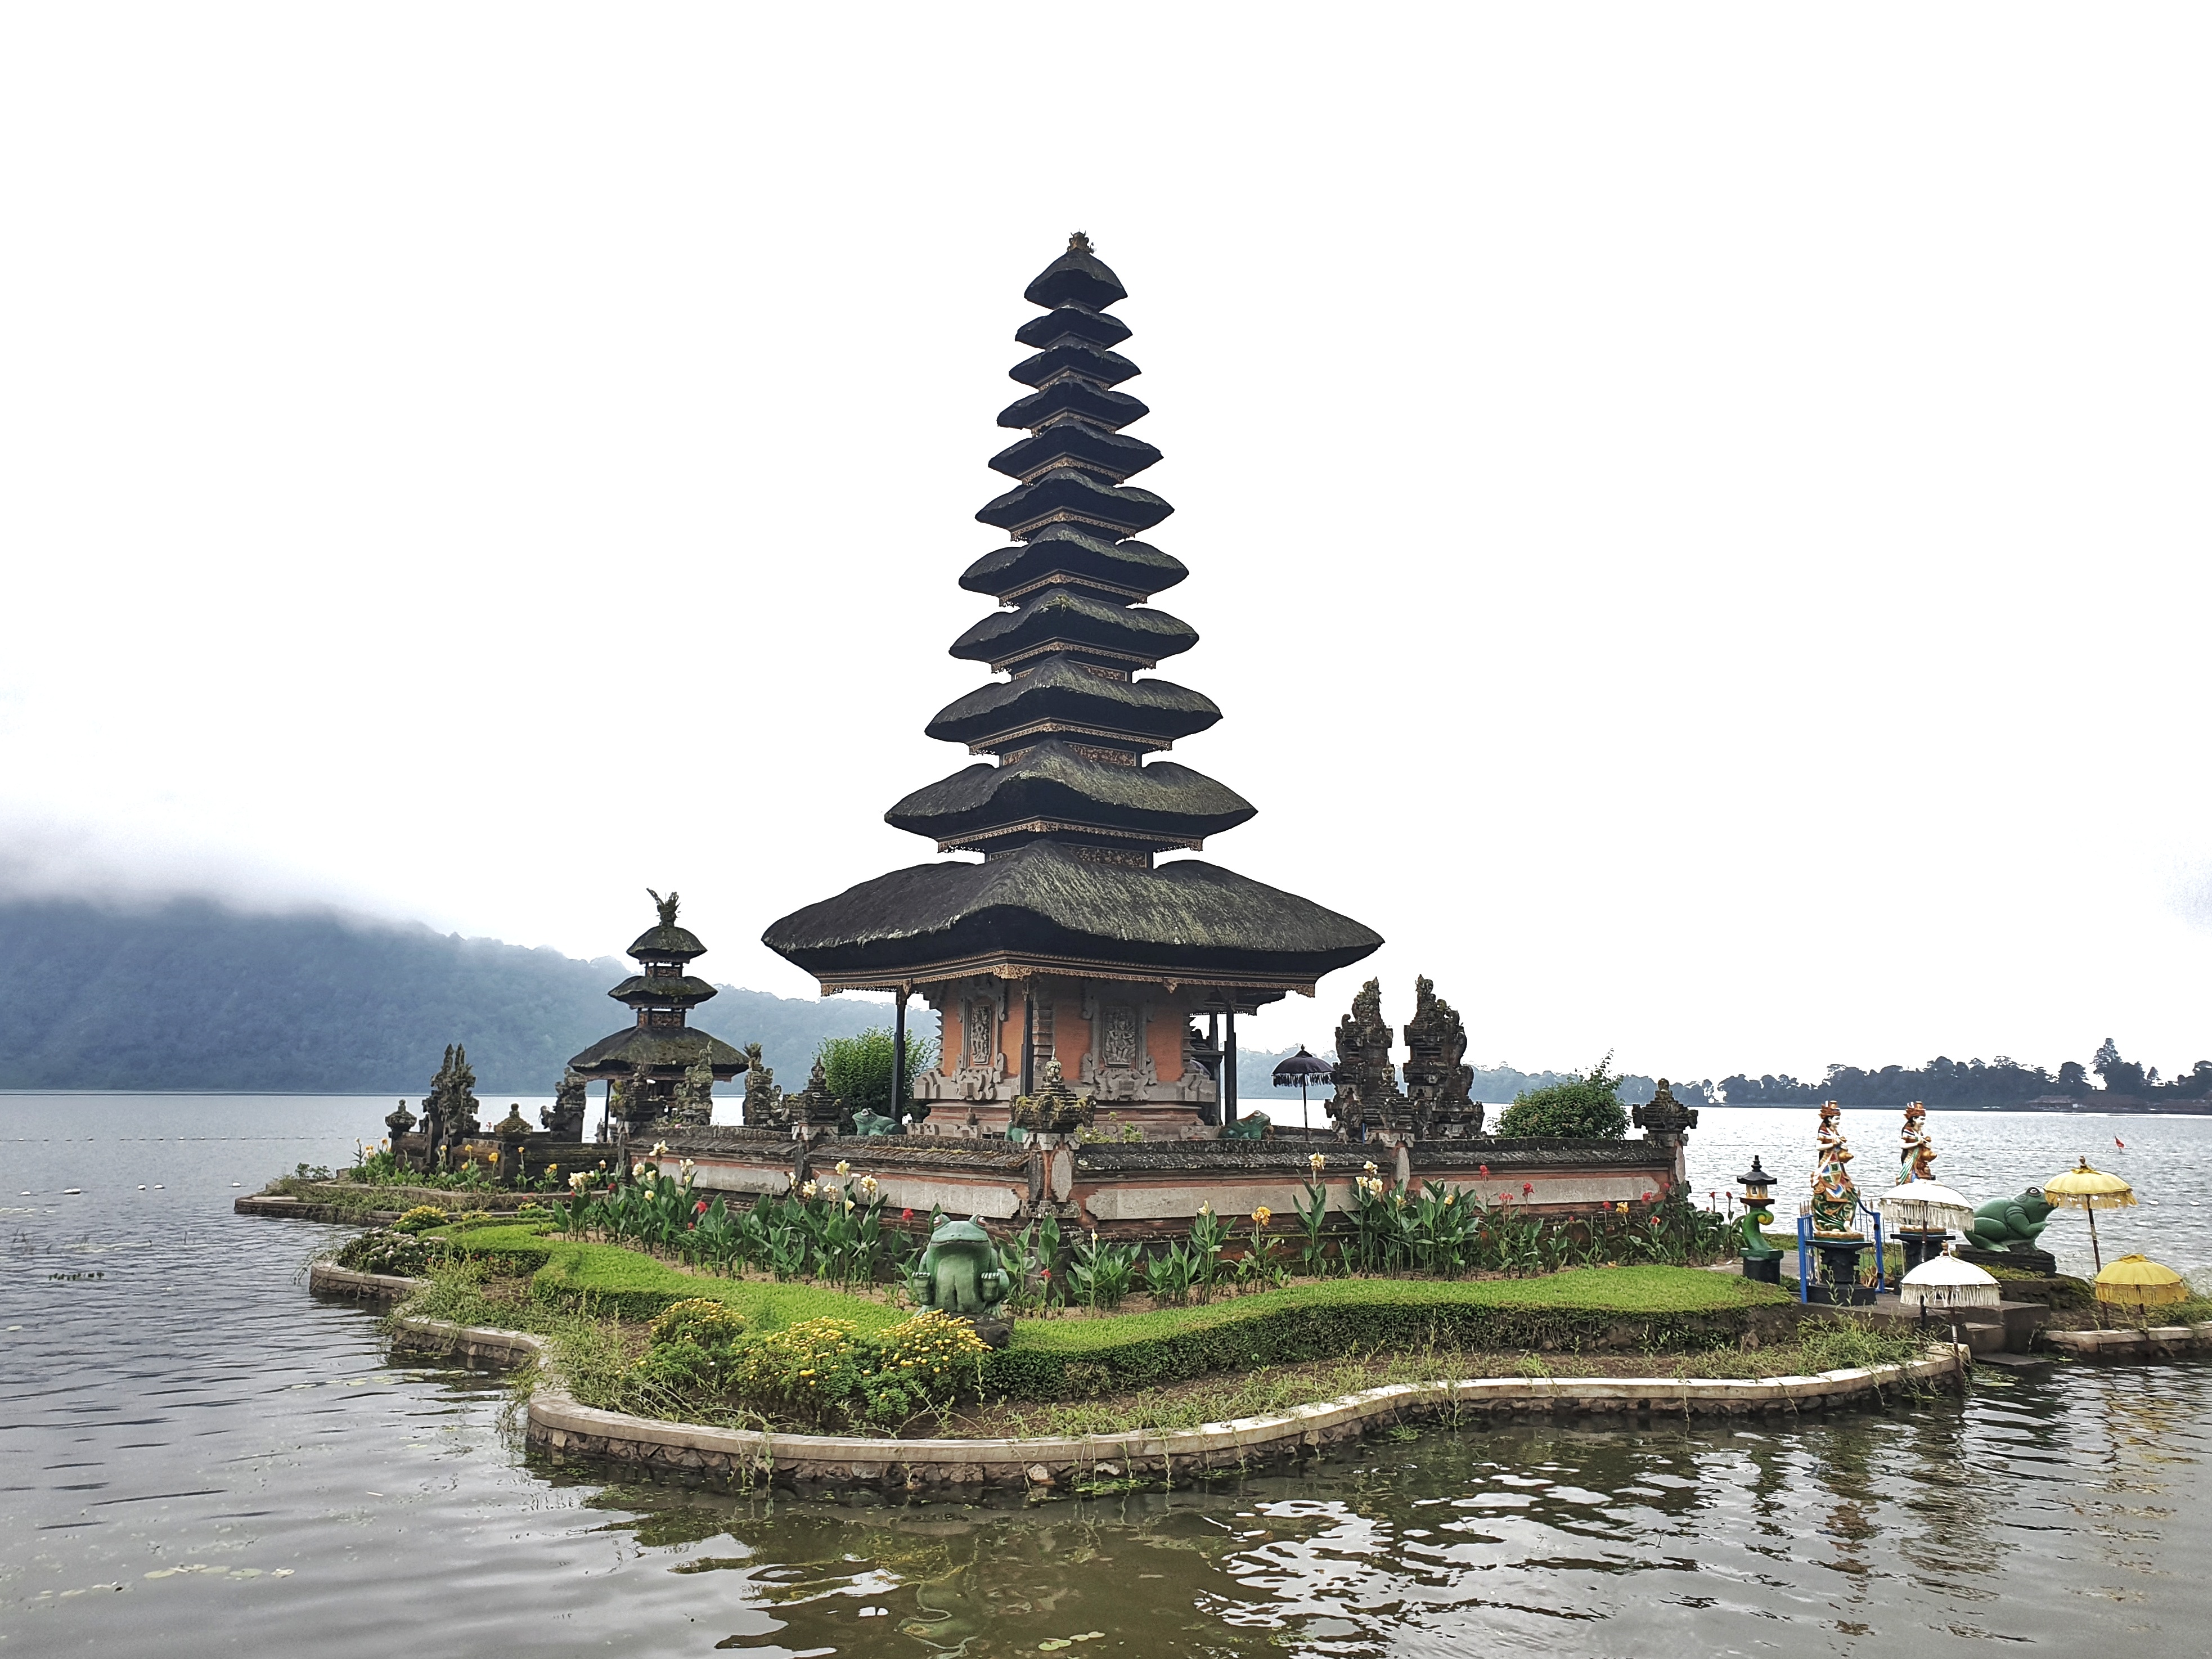 ‘the source temple of Lake Beratan’, is easily the island’s most iconic sanctuary sharing the scenic qualities with the seaside temples of Uluwatu and Tanah Lot. The smooth reflective surface of the lake surrounding most of the temple’s base creates a unique floating impression, while the mountain range of the Bedugul region encircling the lake provides the temple with a scenic backdrop.  Read more at: http://www.bali-indonesia.com/attractions/ulun-danu-beratan-temple.htm?cid=ch:OTH:001